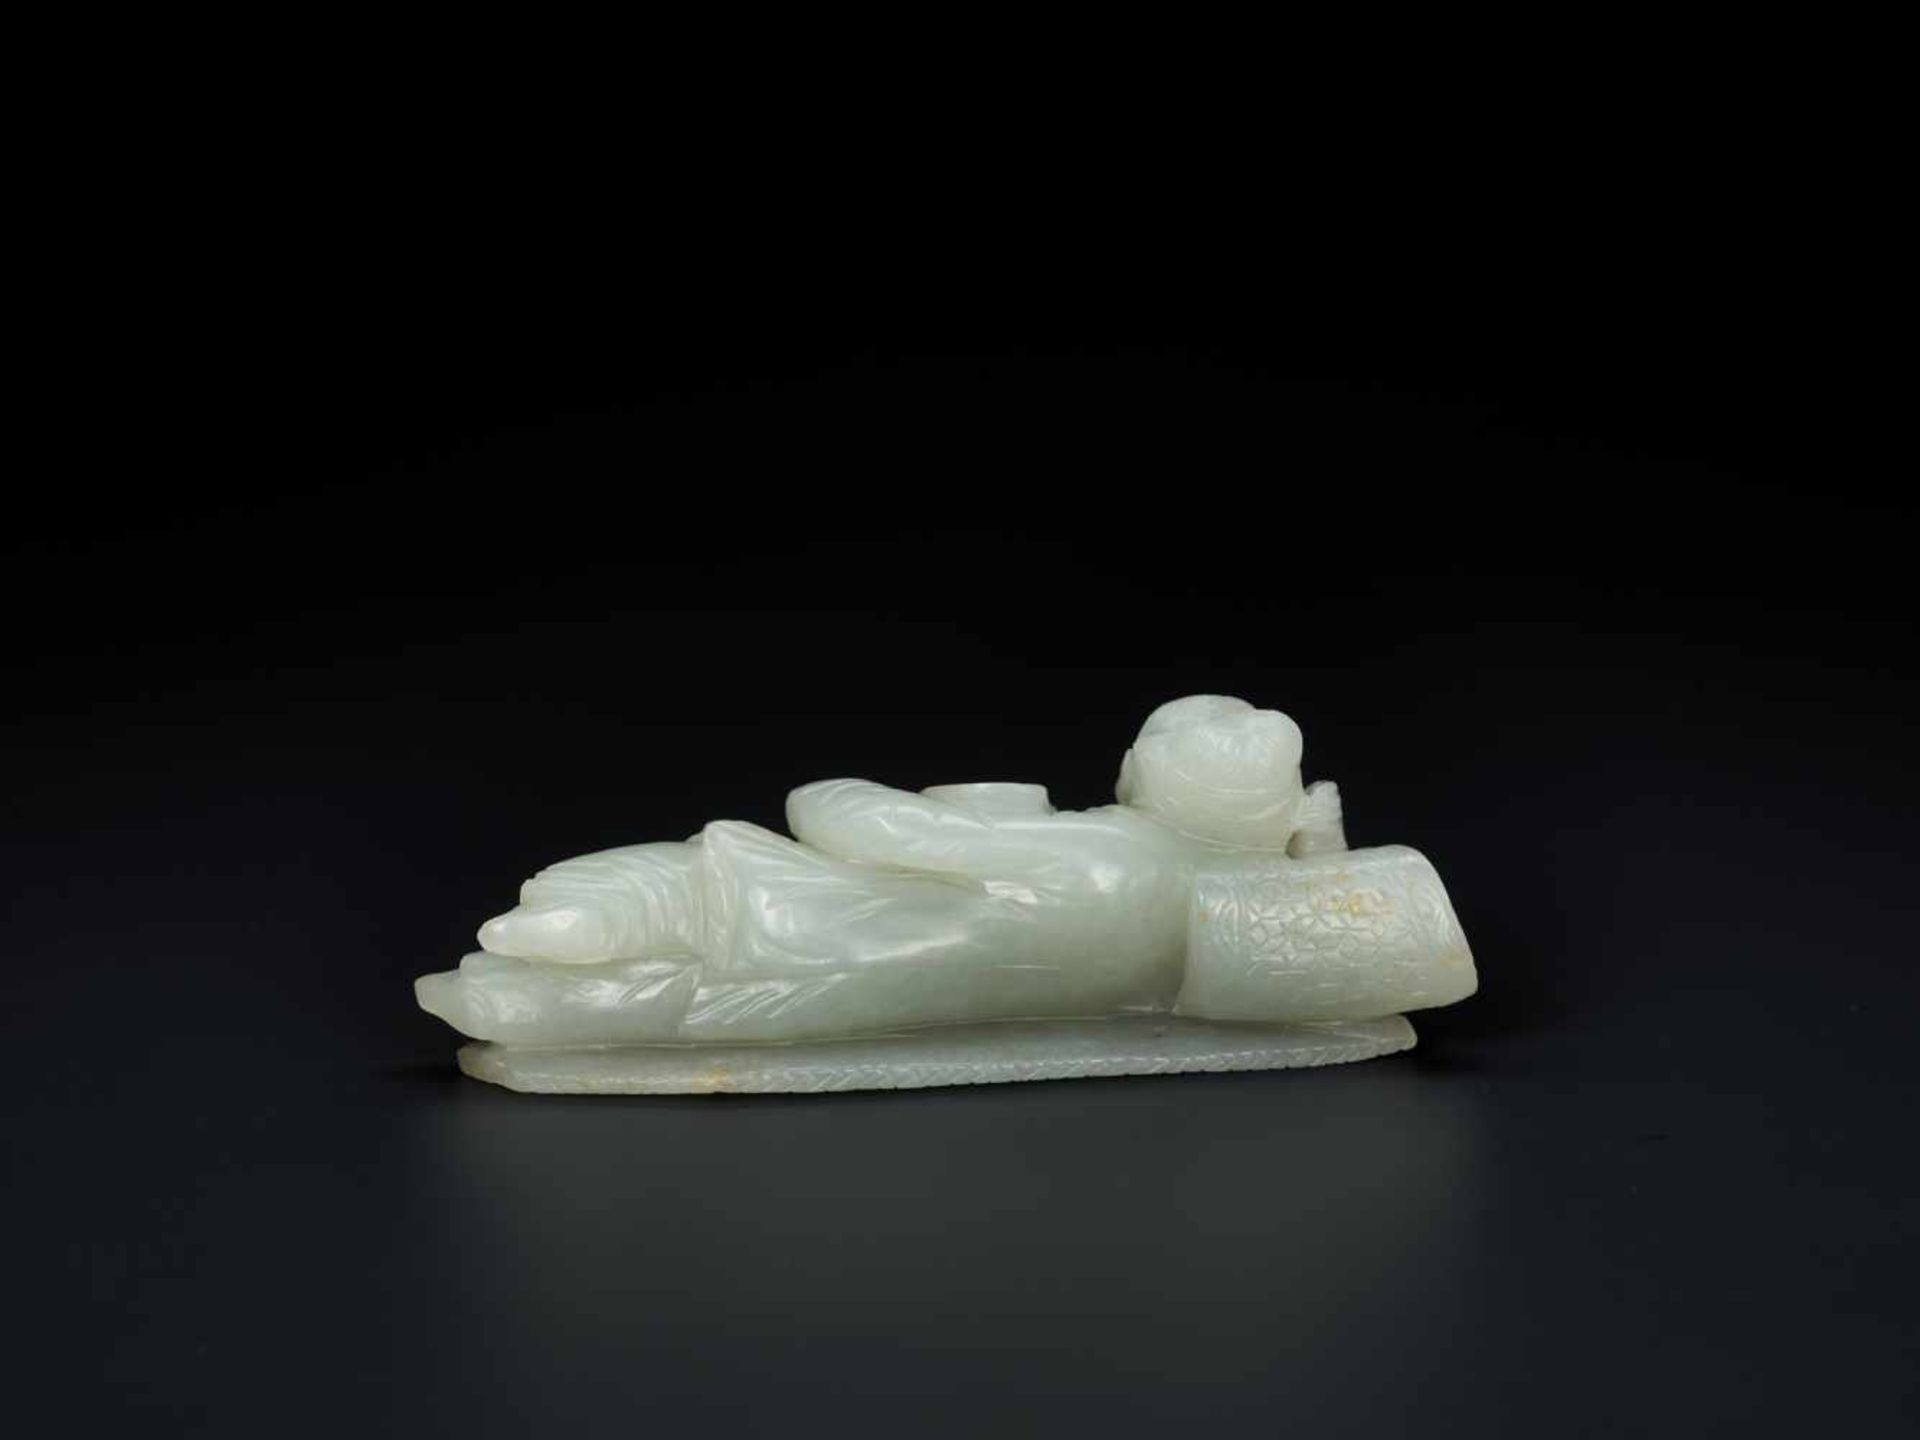 AN 18TH CENTURY CELADON JADE CARVING OF A RECLINING LADY Celadon Jade of an even color with very few - Image 2 of 7